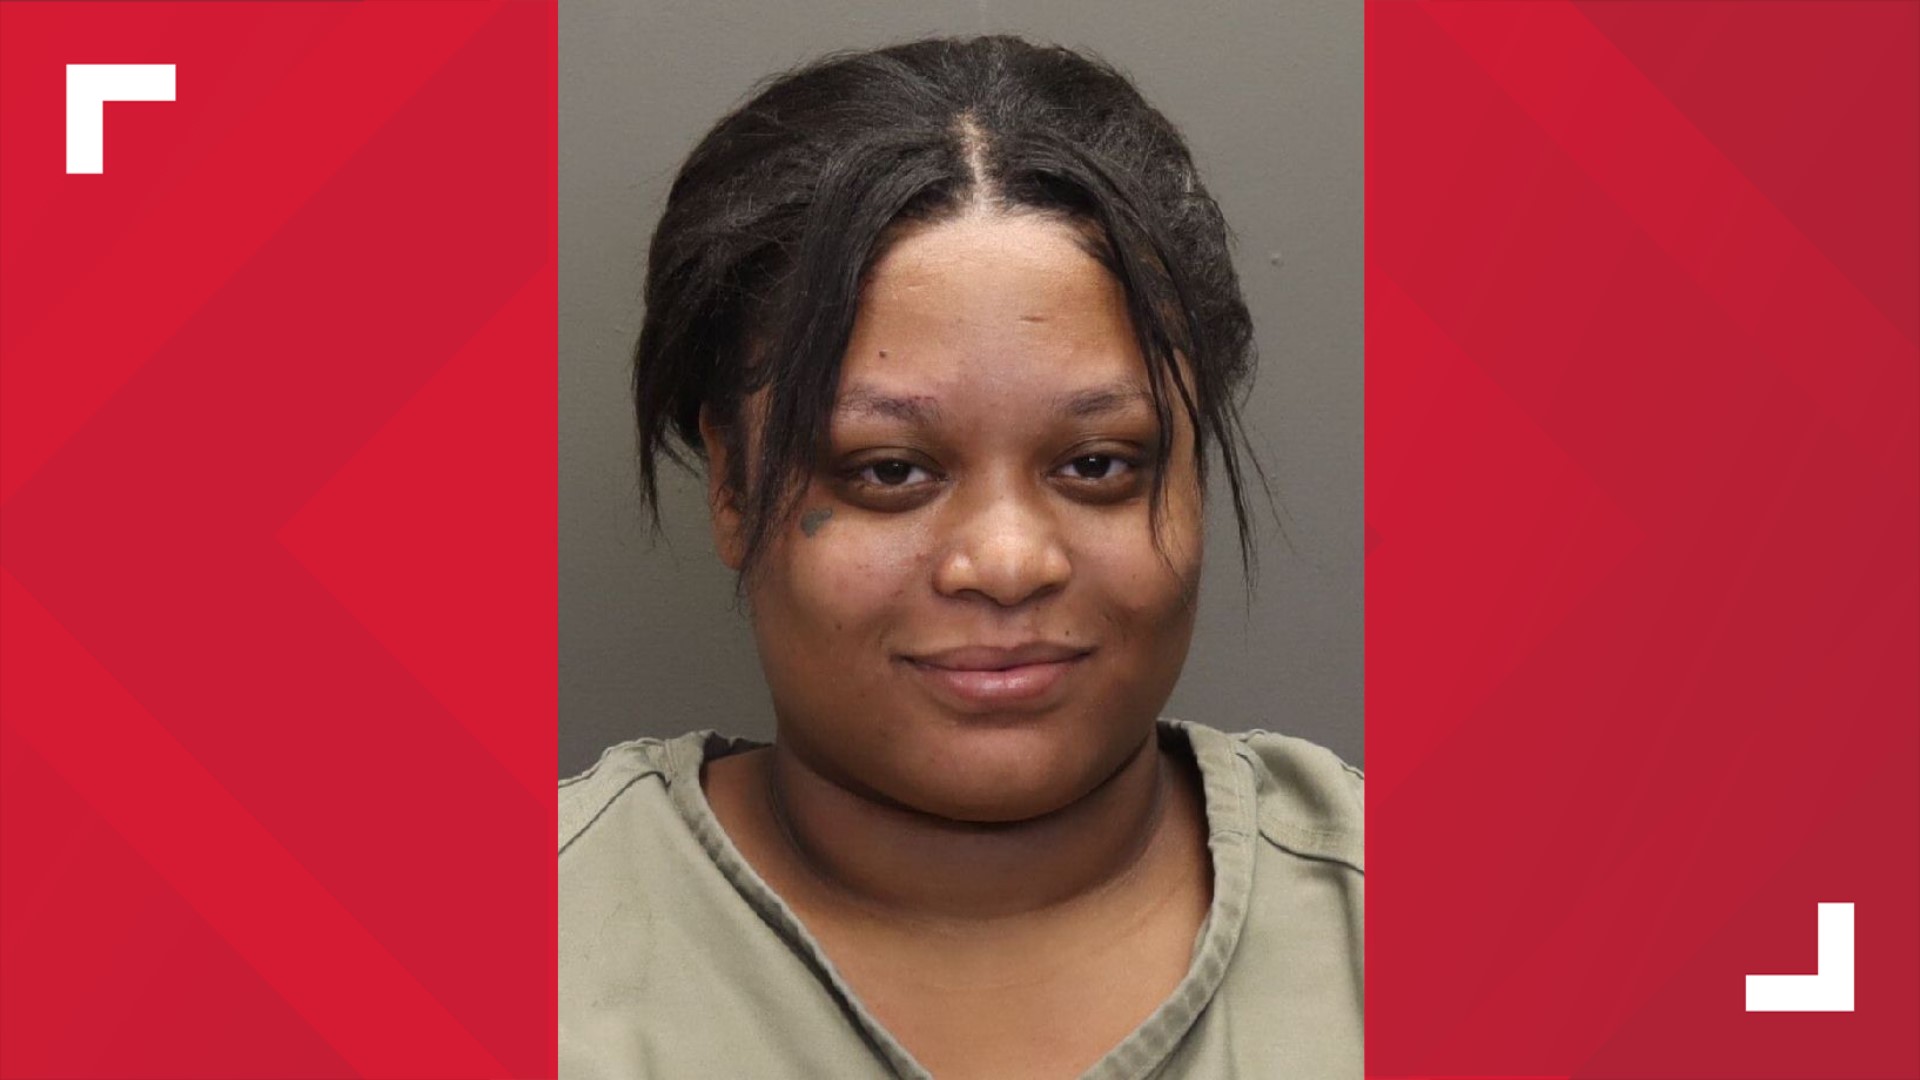 Eddrea Williams, 24, has been charged with felonious assault.